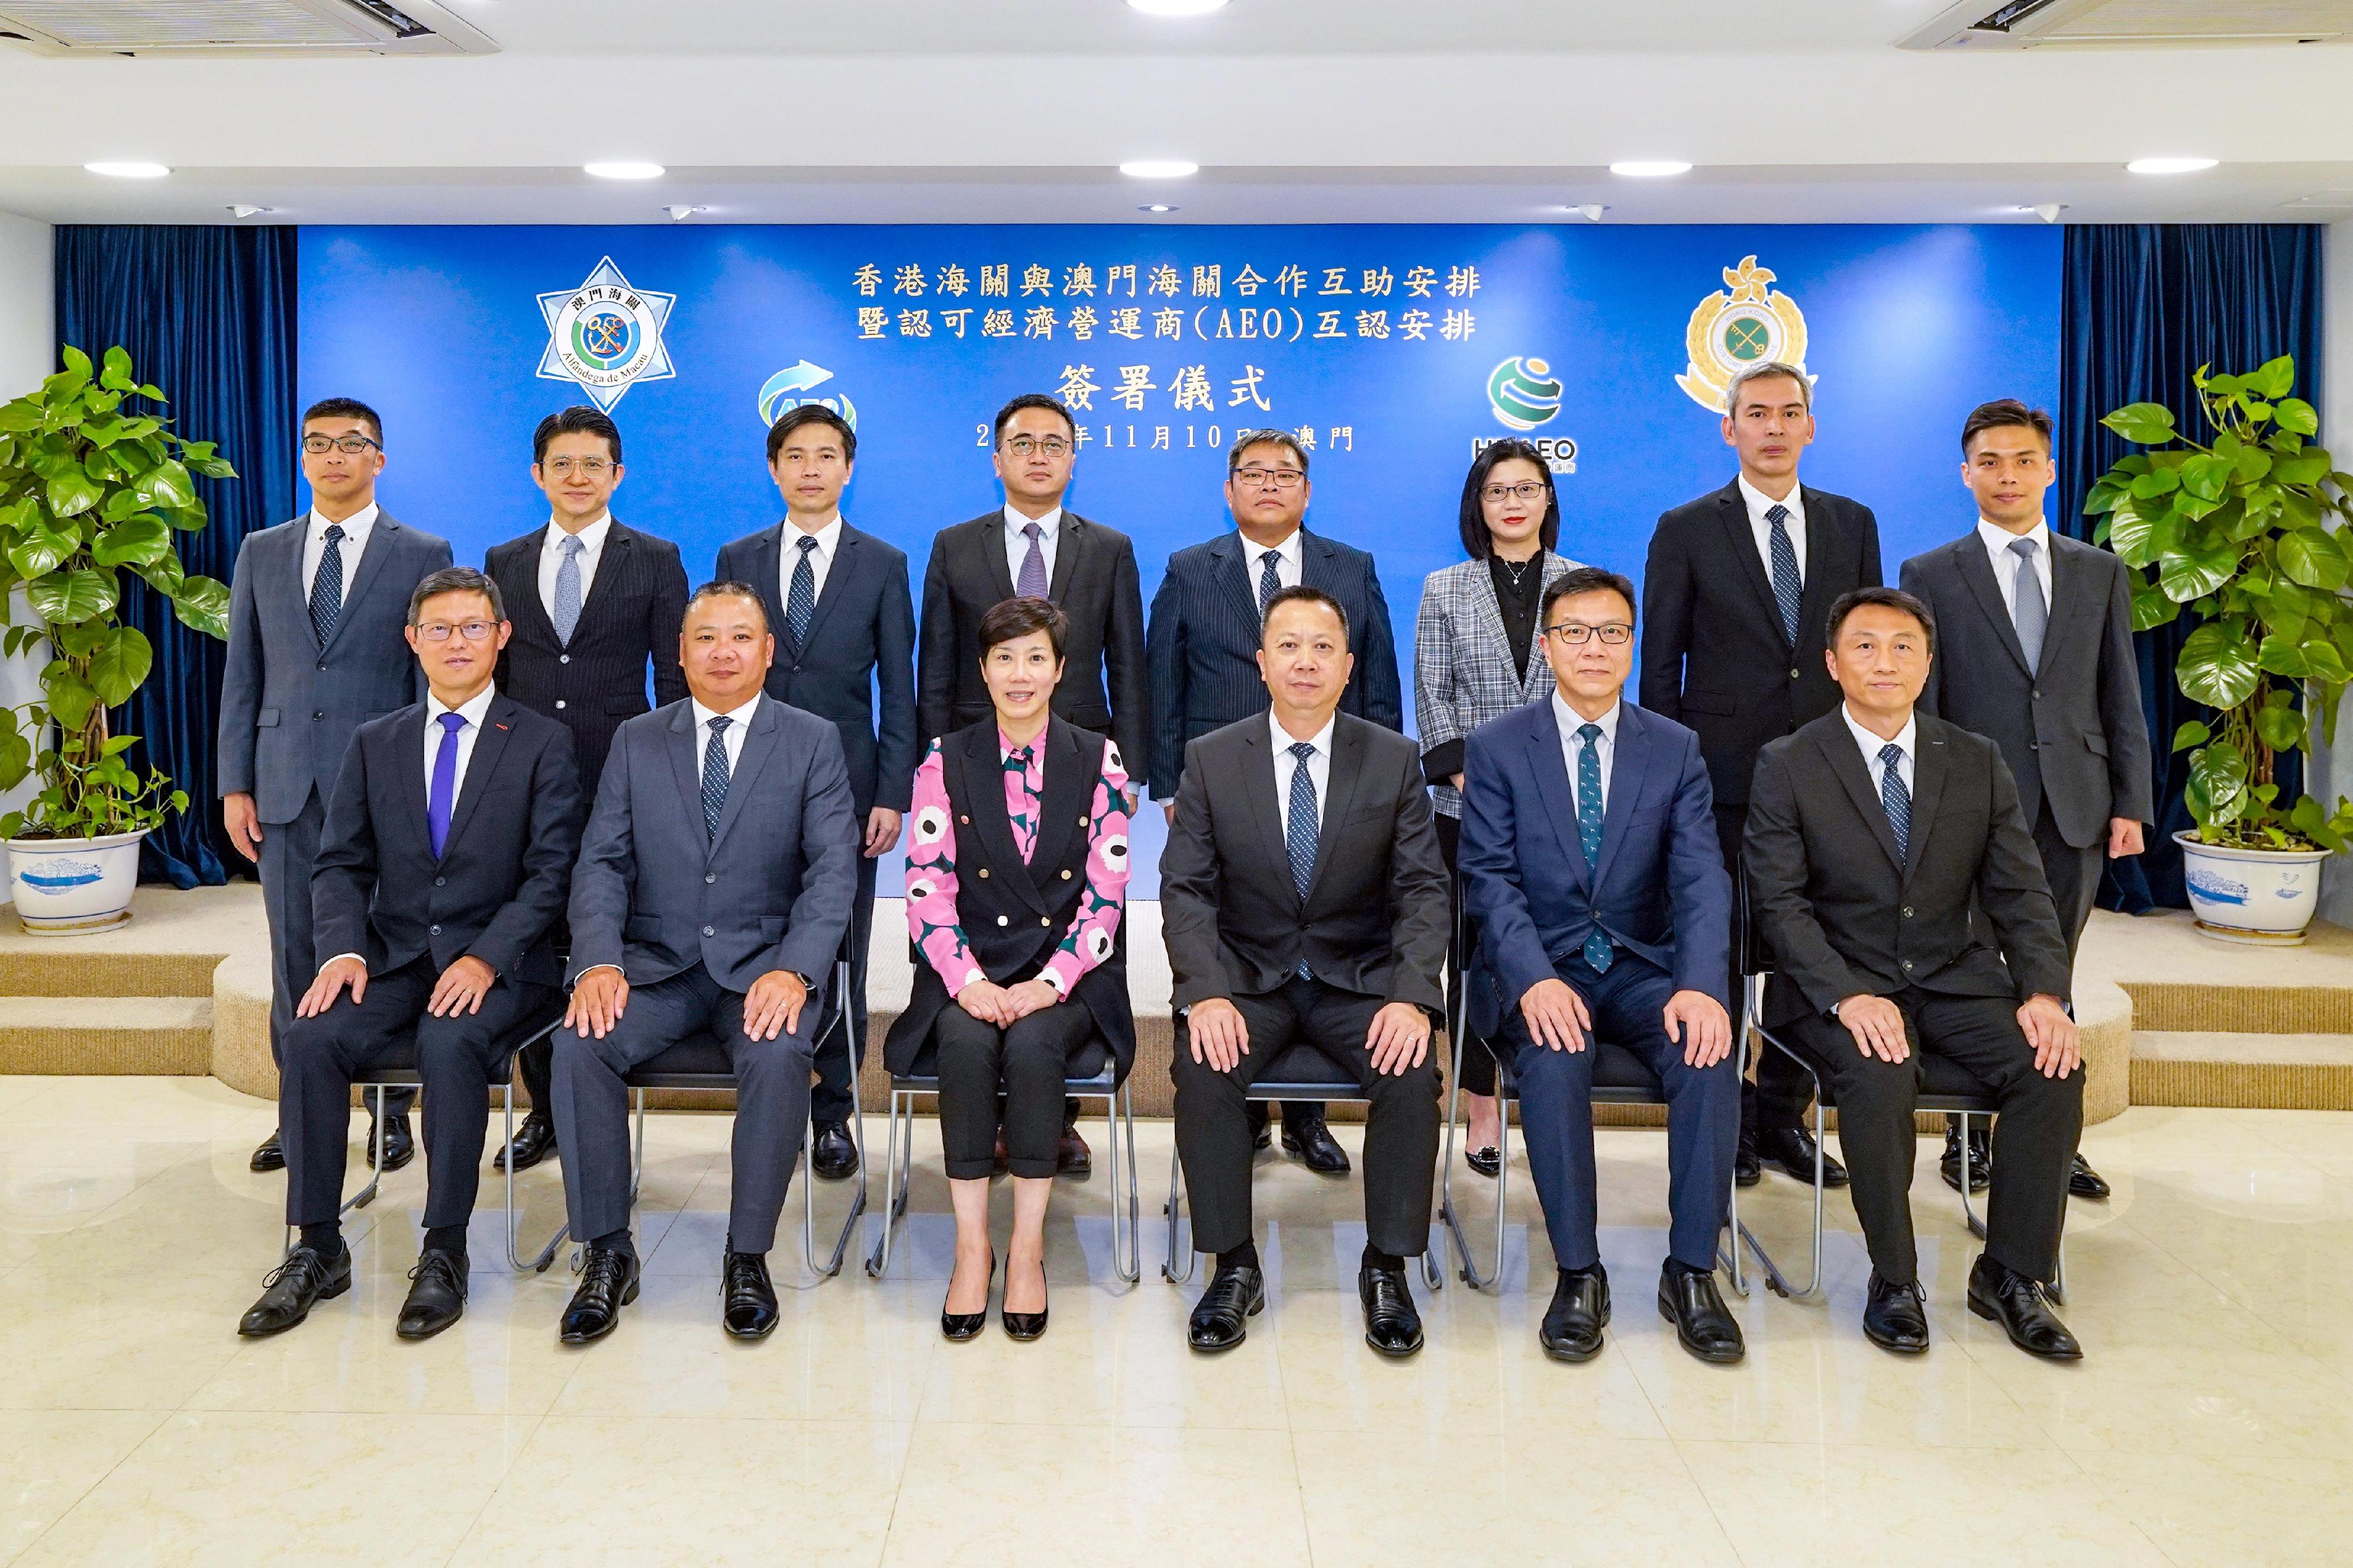 The Commissioner of Customs and Excise, Ms Louise Ho, today (November 10) led a delegation of Hong Kong Customs to visit the Macao Customs Service. Photo shows Ms Ho (front row, third left); the Director-General of the Macao Customs Service, Mr Vong Man-chong (front row, third right); the Deputy Commissioner (Management and Strategic Development), Mr Ellis Lai (front row, second right); the Assistant Commissioner (Excise and Strategic Support), Mr Rudy Hui (front row, first left); and other Hong Kong Customs delegation members and officers of Macao Customs.